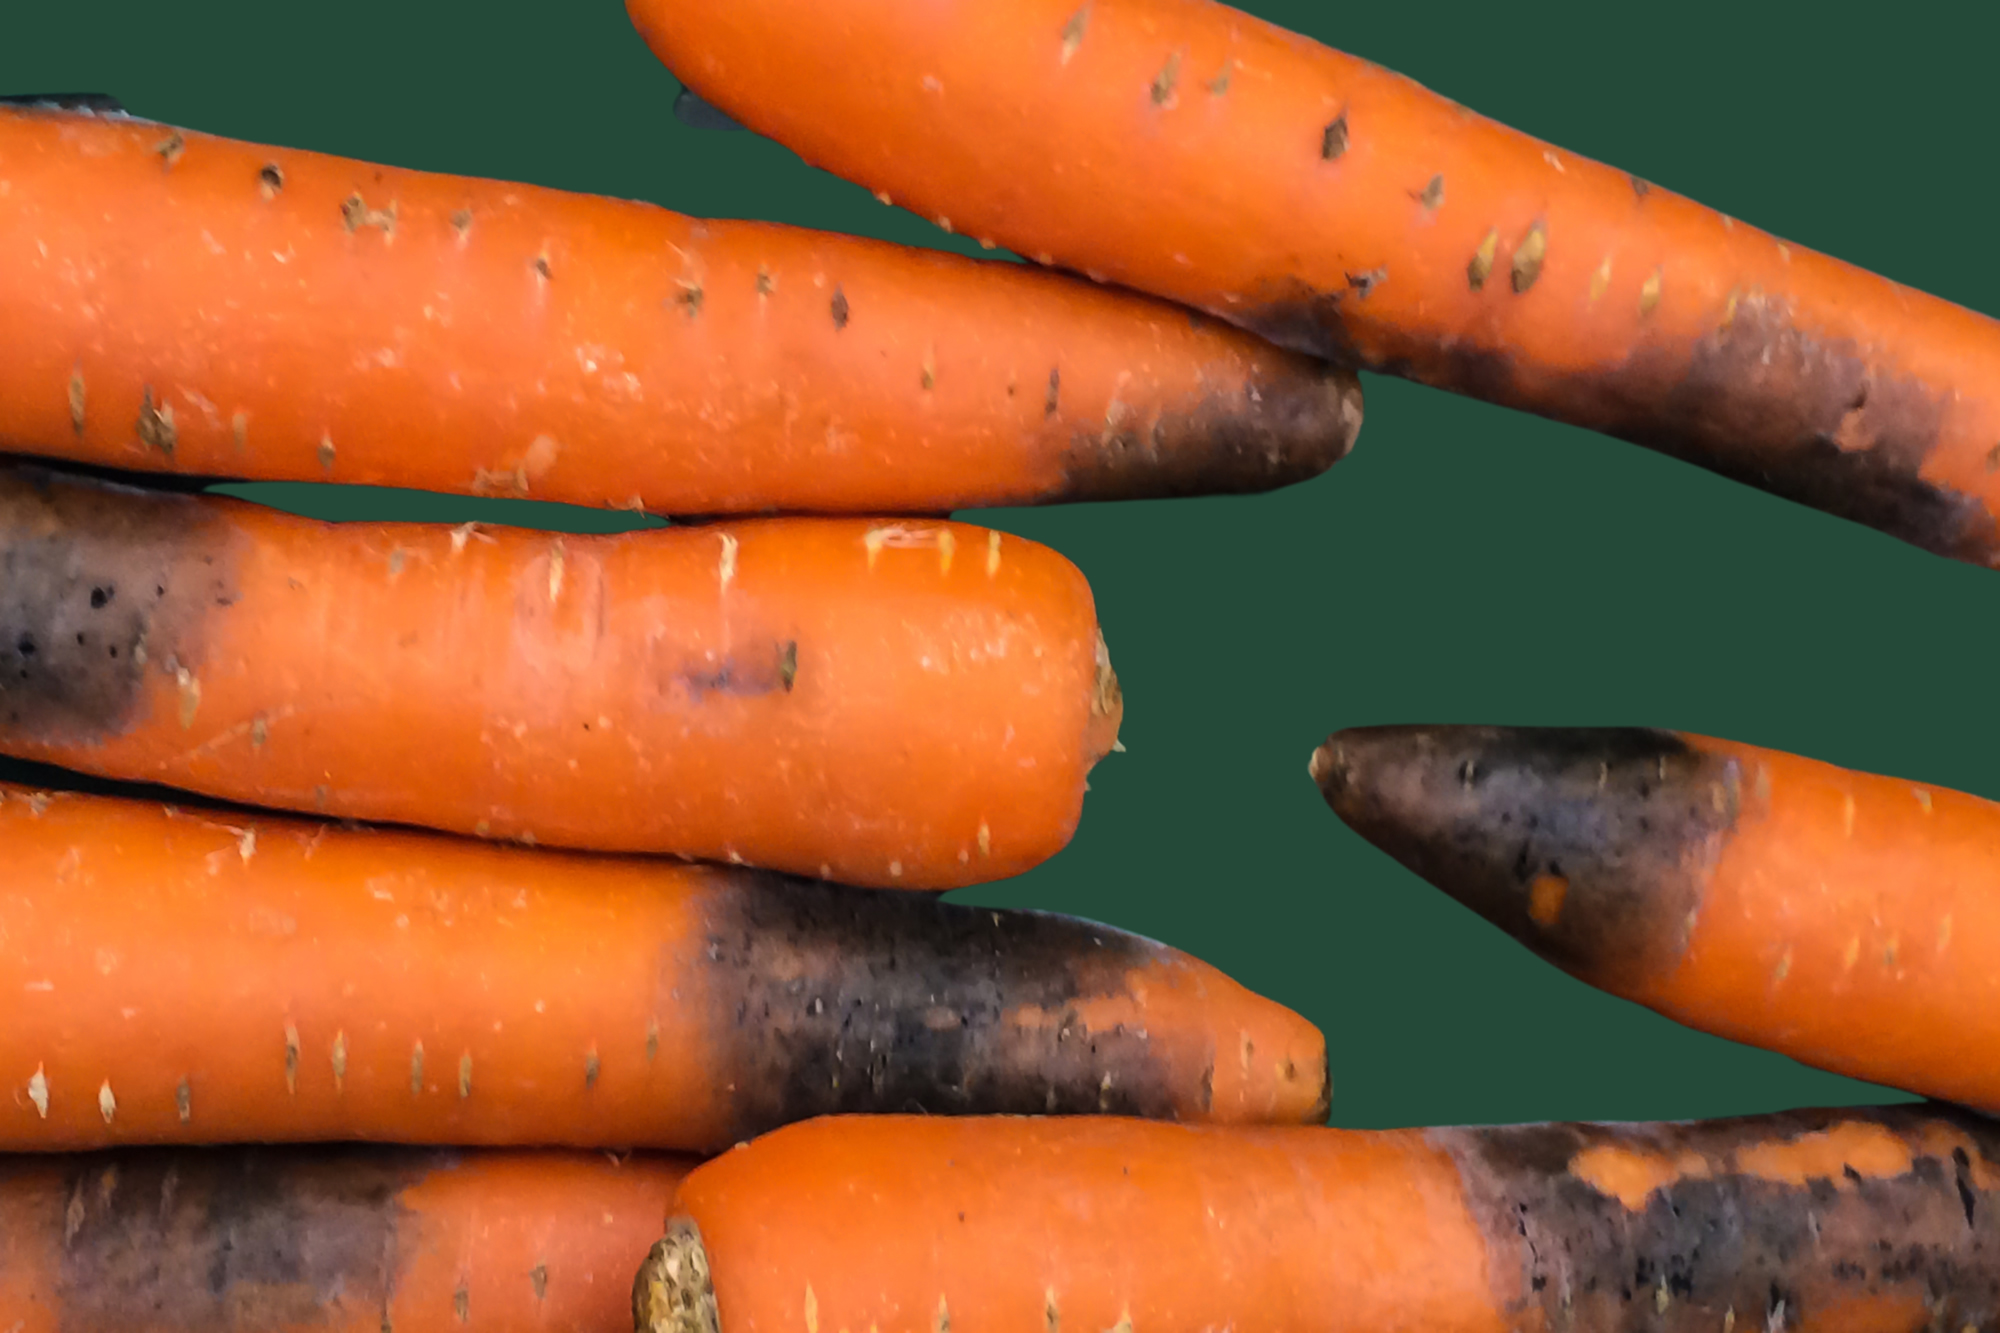 Black root rot, attributed to Phytophthora spp., poses a significant threat to carrot crops. This fungal infection affects root health, potentially impacting crop yield.